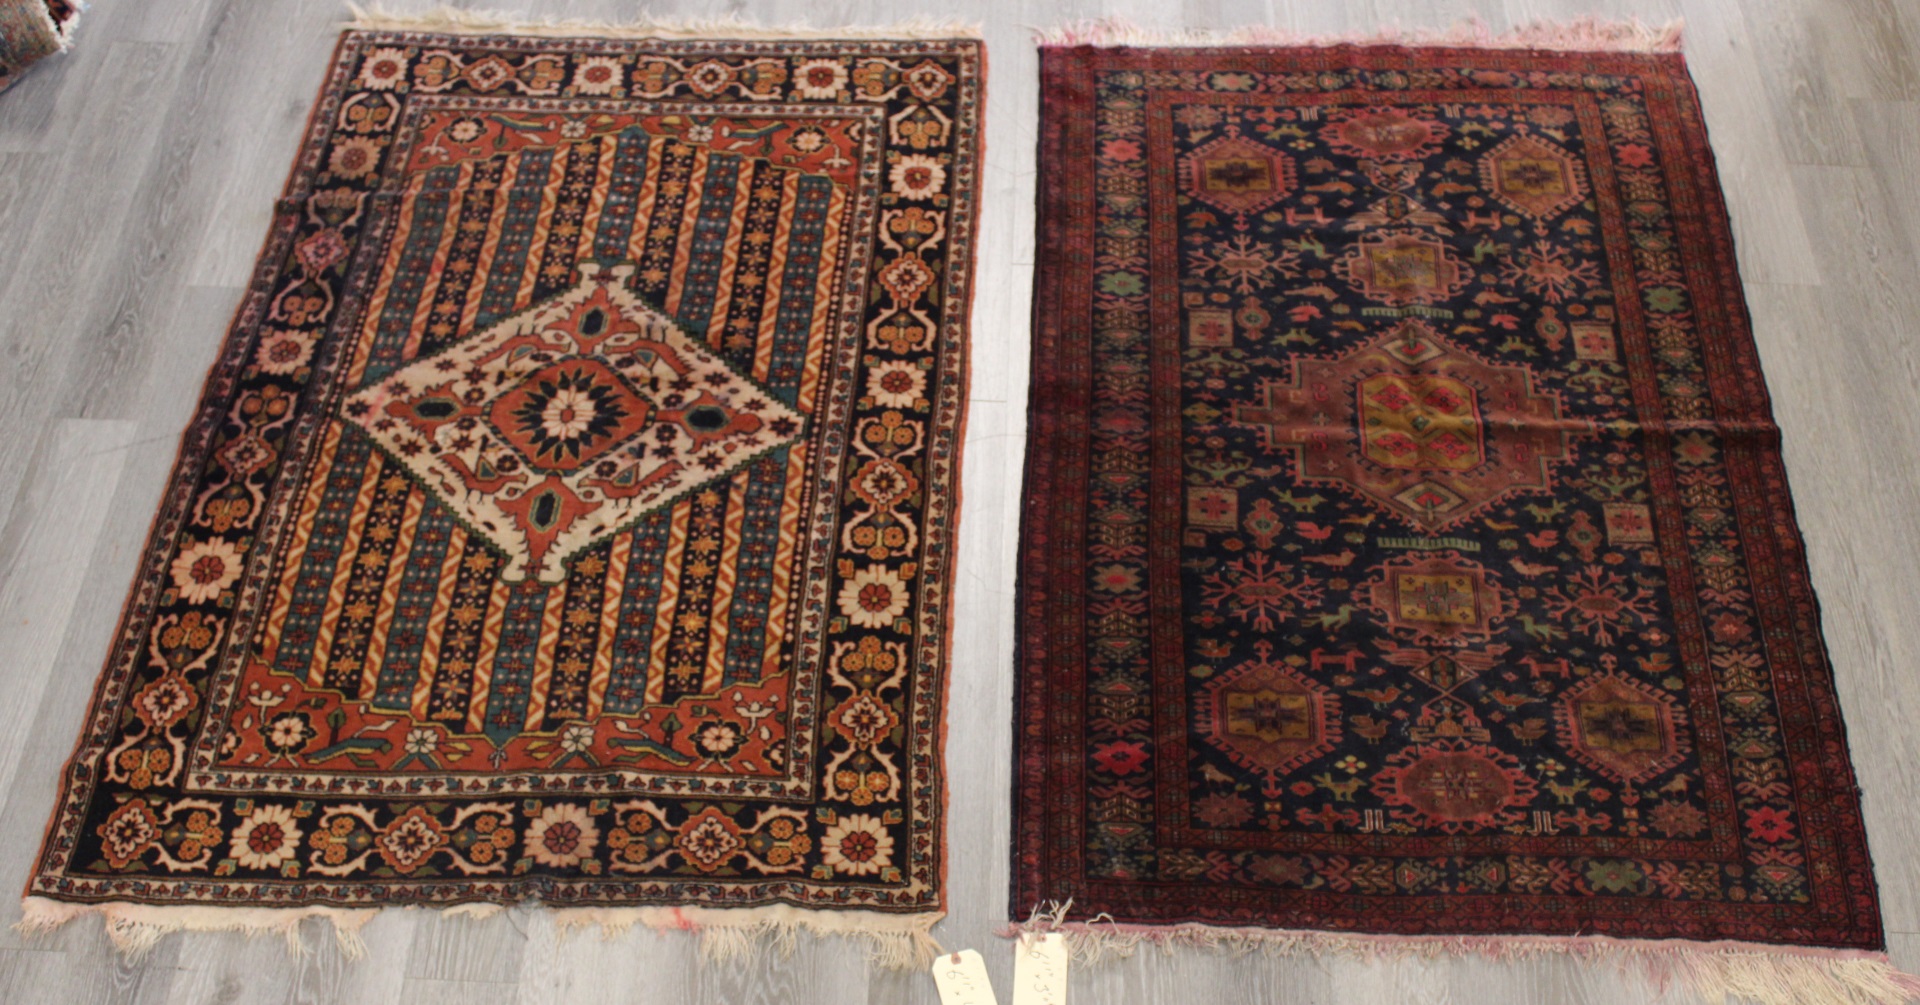 2 ANTIQUE AND FINELY HAND WOVEN